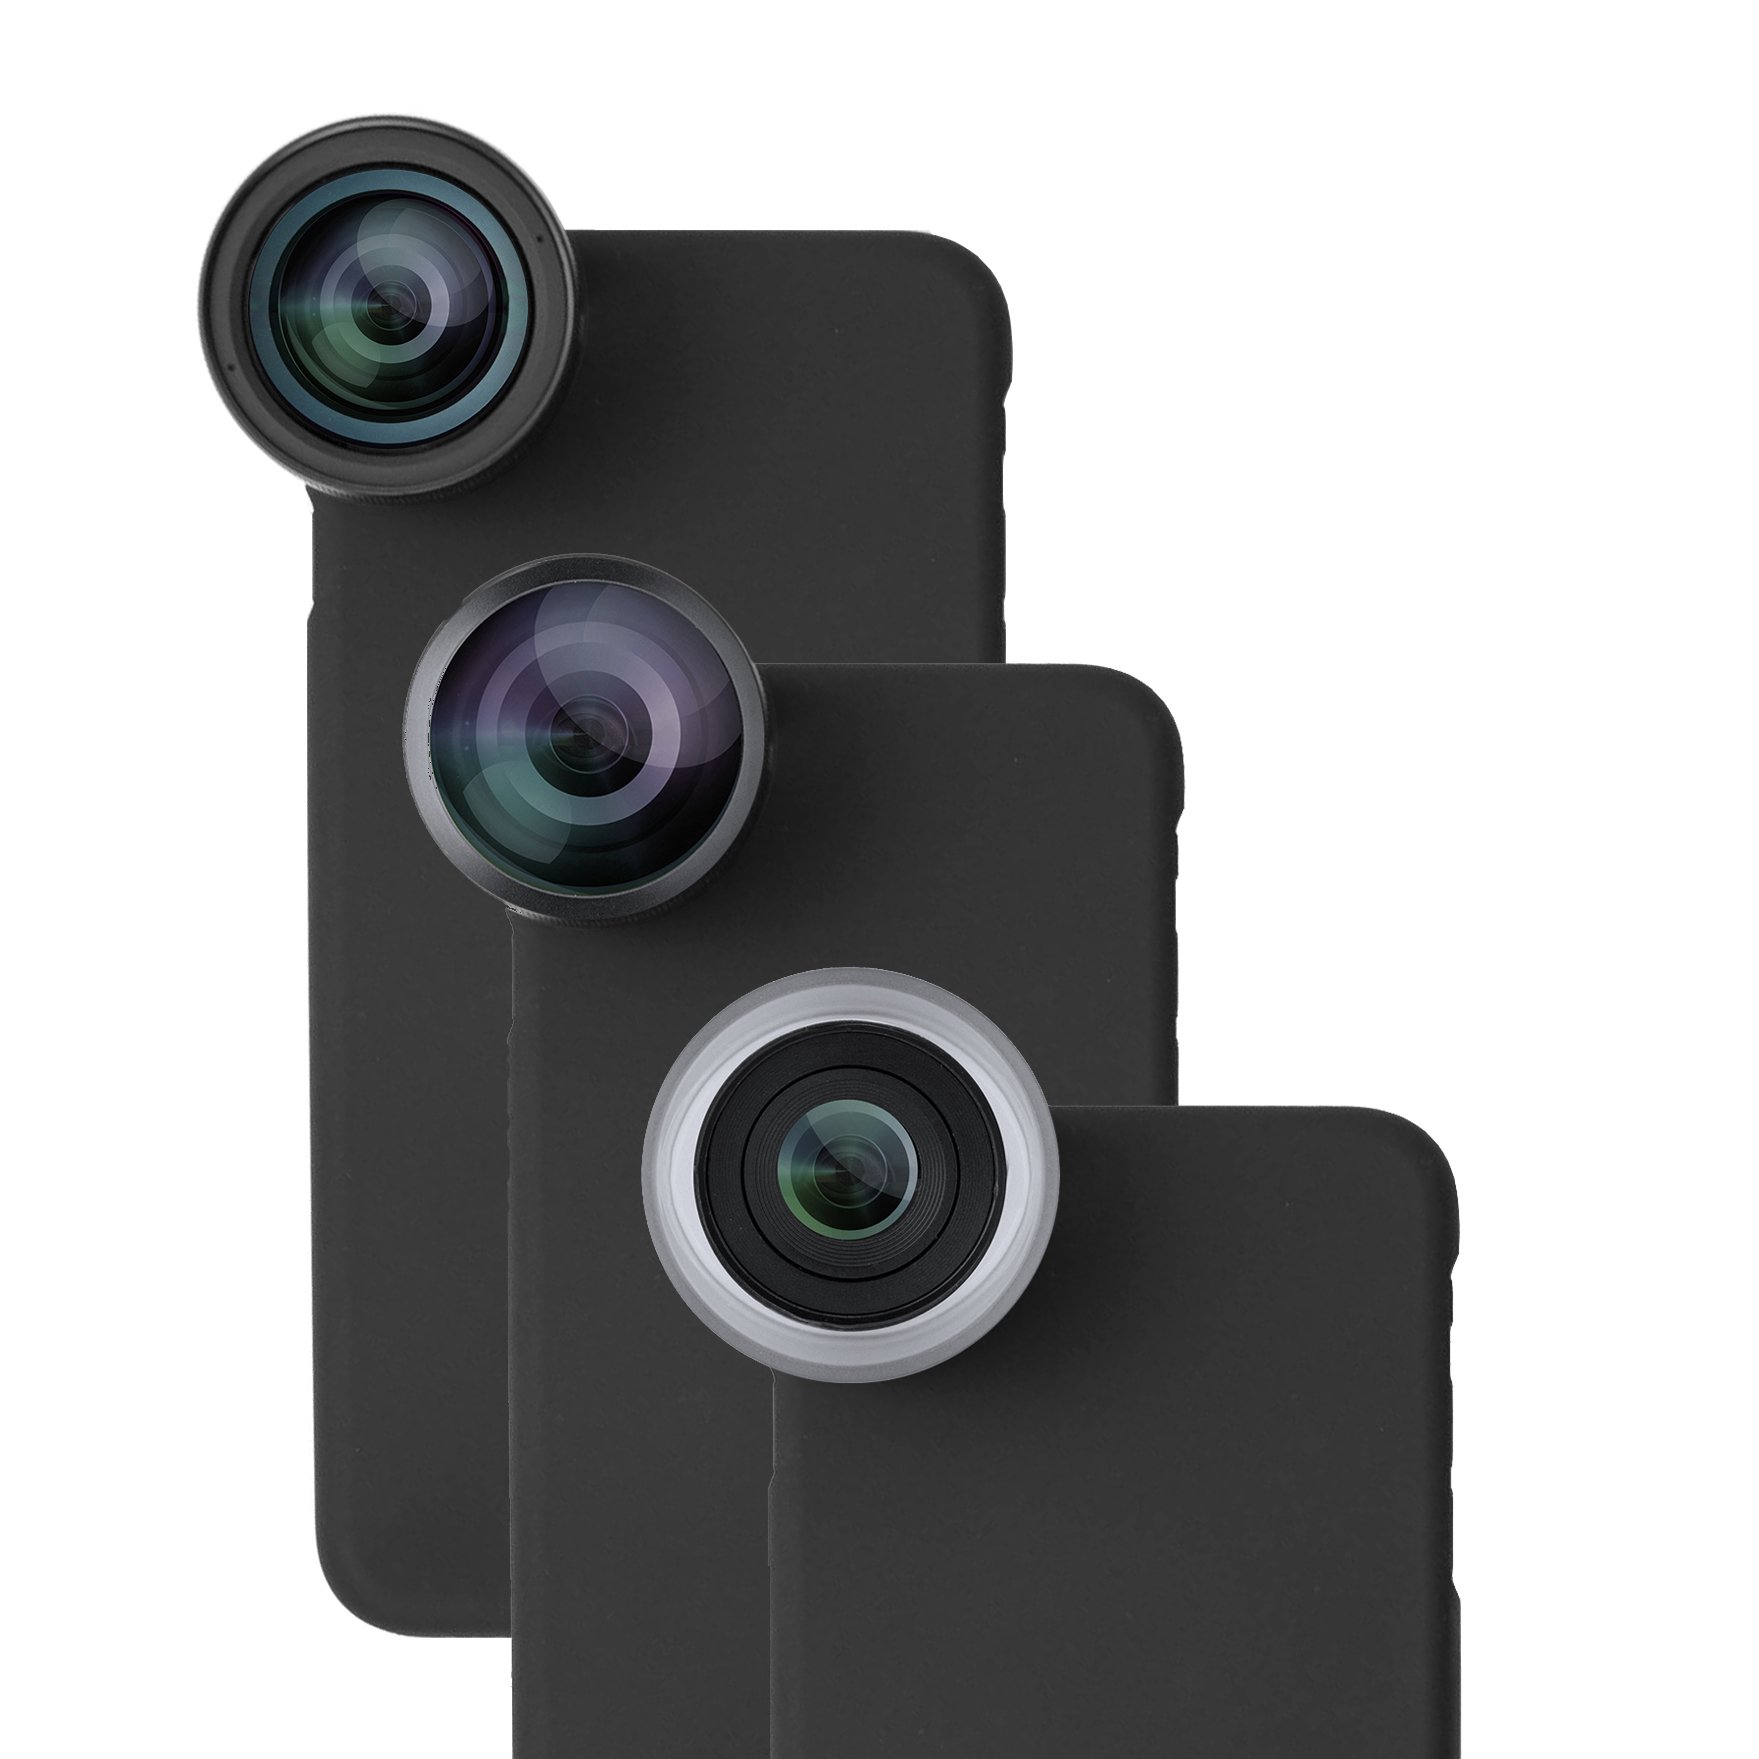 These iPhone Camera Lenses are DSLR Killers